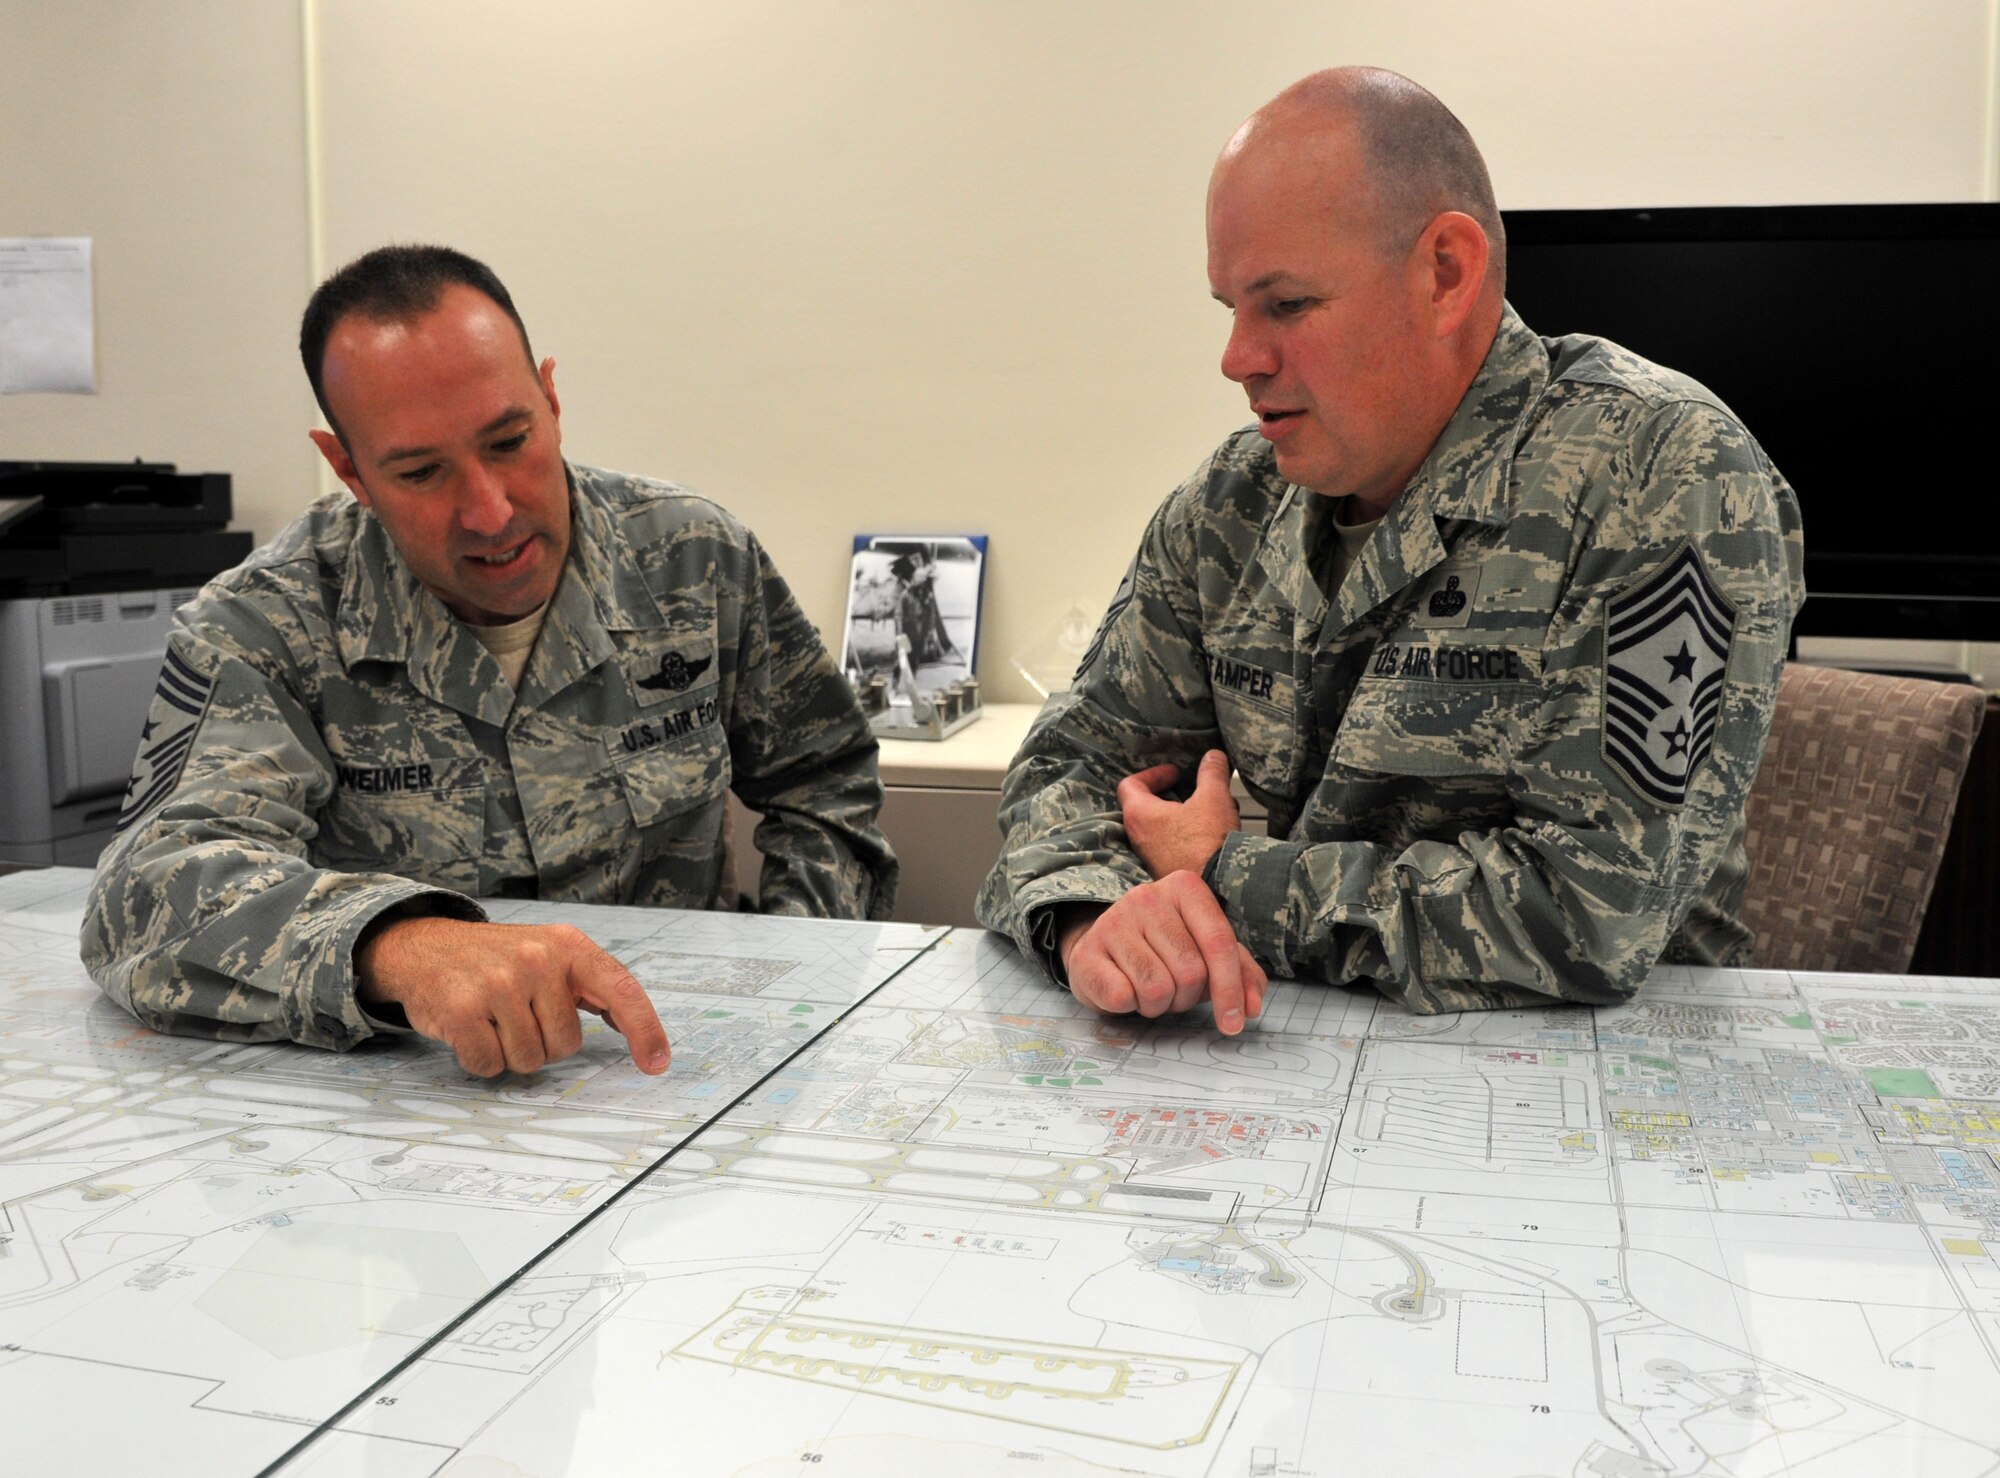 Command Chief Master Sgts. Daniel Weimer, 58th Special Operations Wing (left), and Robert Stamper, 377th Air Base Wing (right), discuss cooperation between their respective wings here Aug. 23. (U.S. Air Force photo by Jim Fisher)